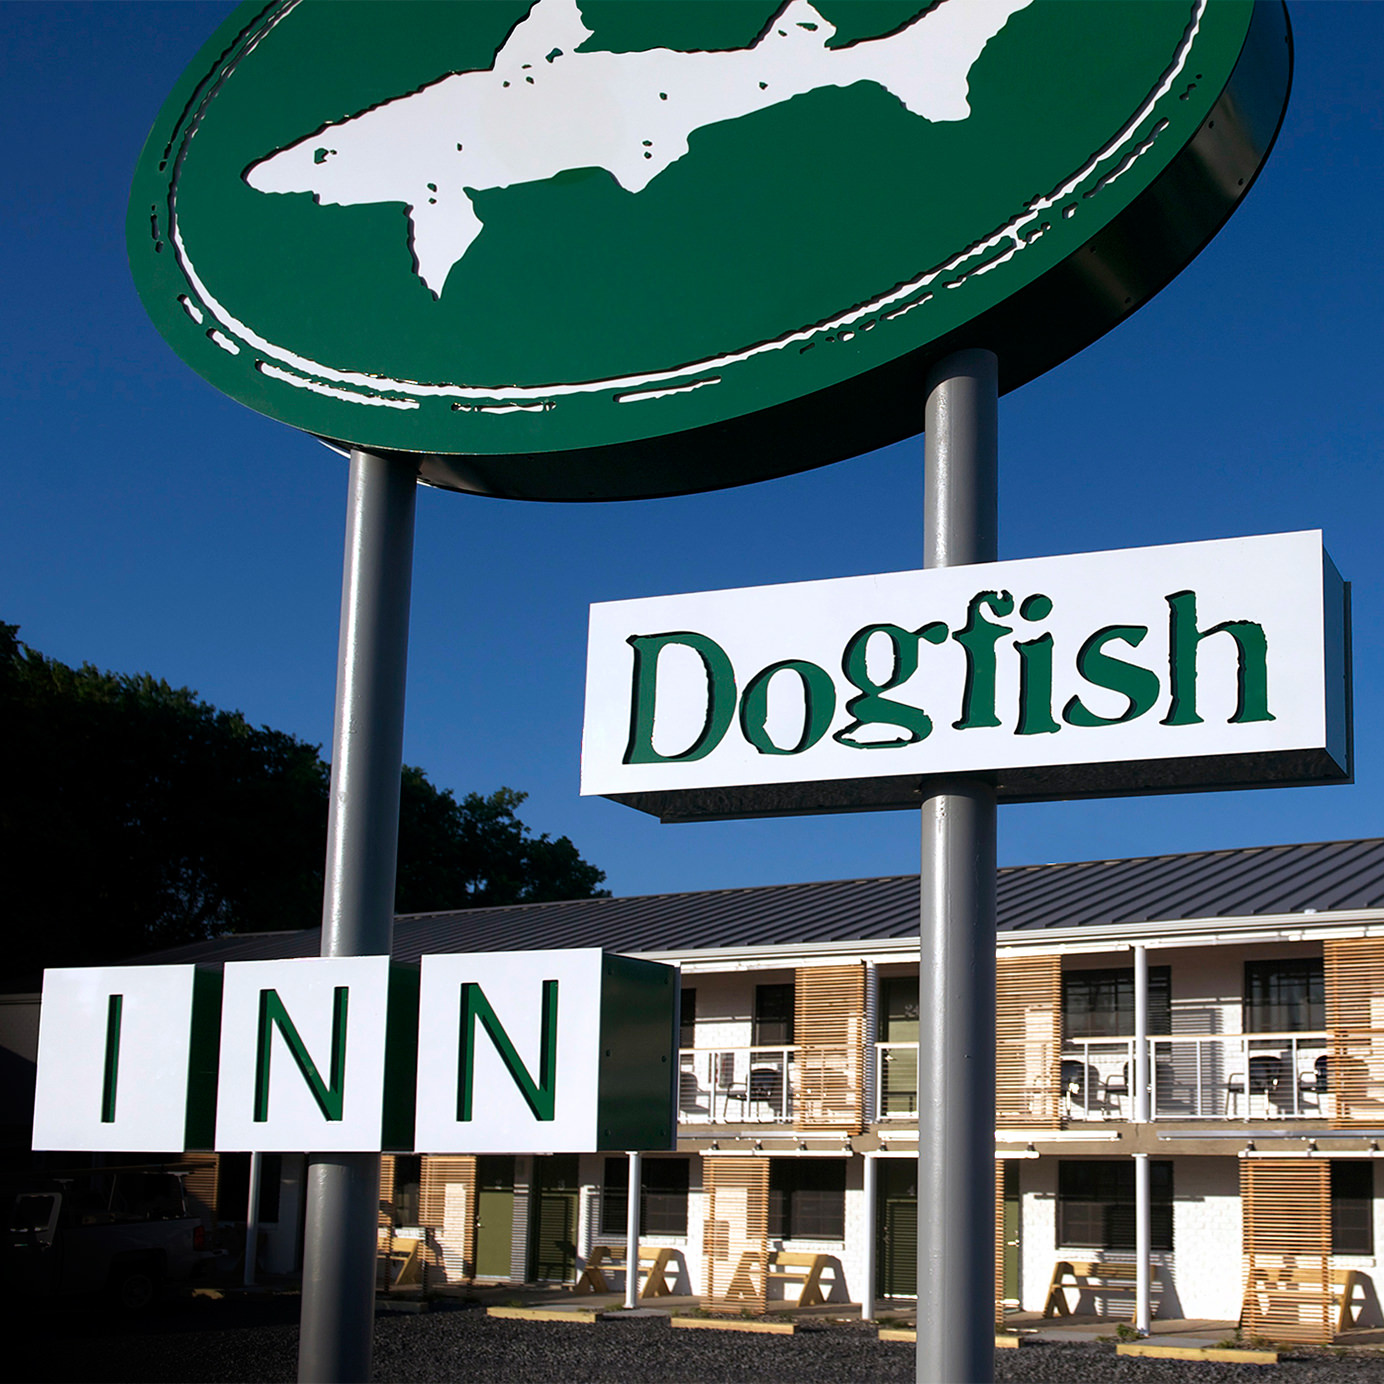 How to Get the Most Out of Your Visit to Dogfish Head Brewery